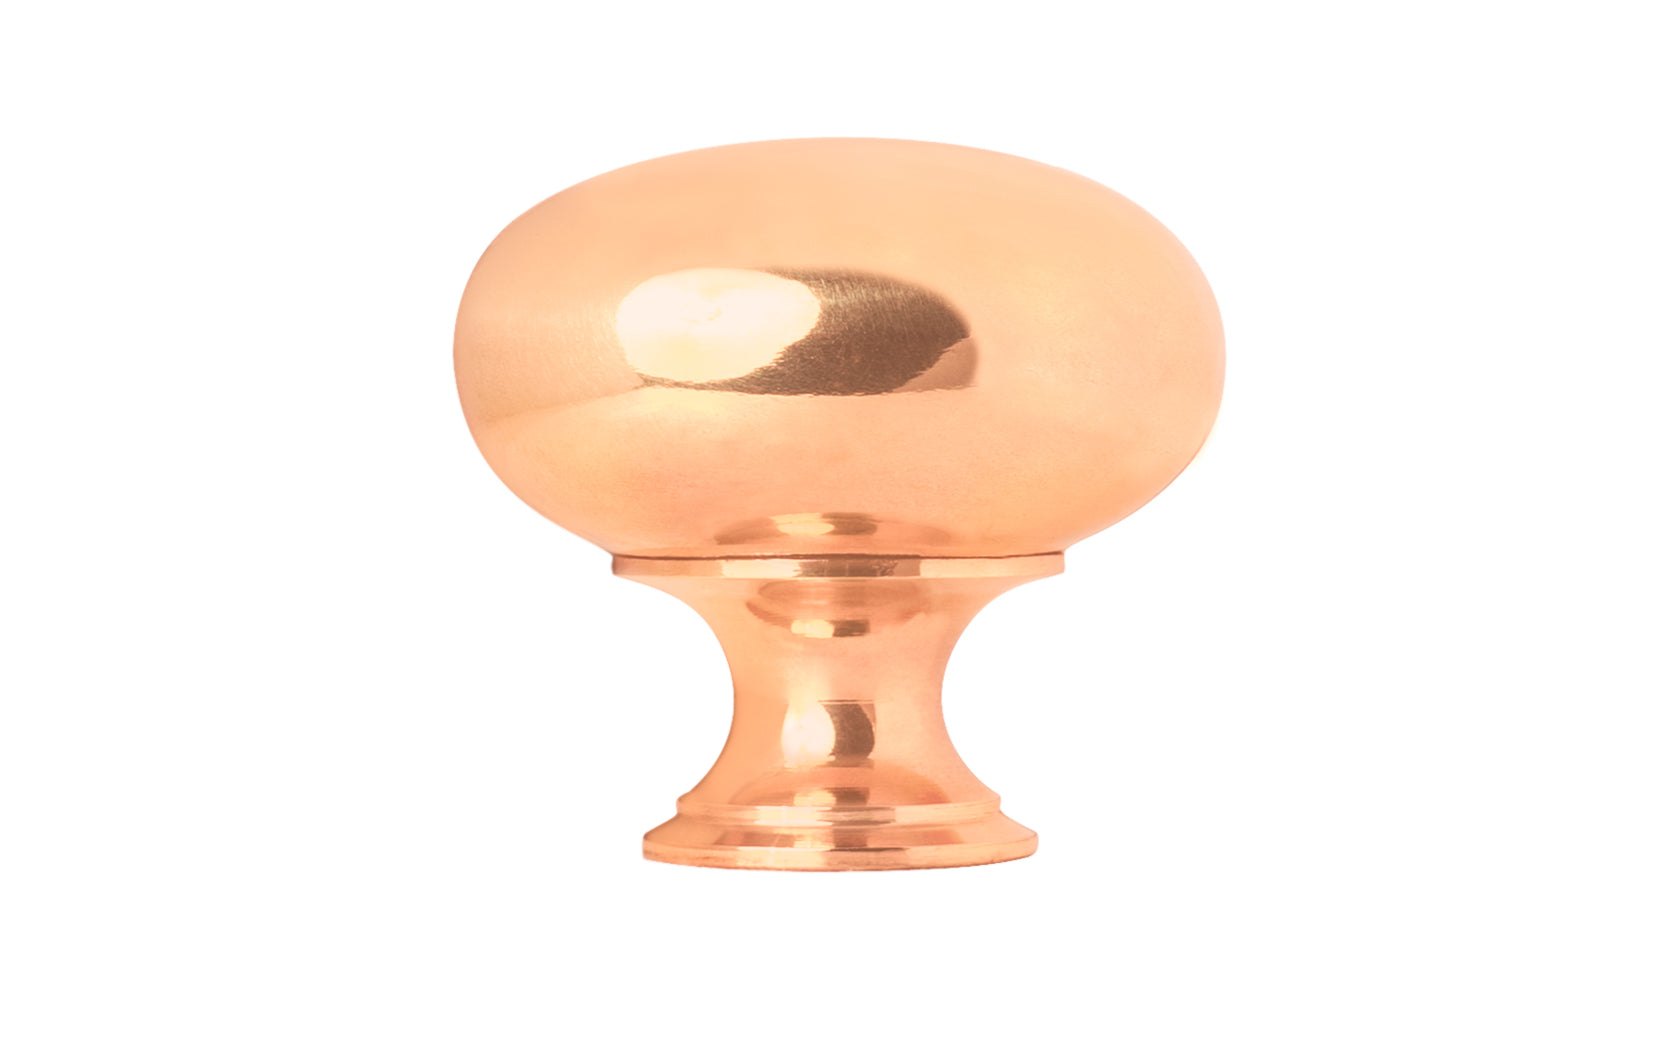 Vintage-style Hardware · Traditional & Classic Brass Knob with a Polished Copper Finish. 1-1/2" diameter size knob. Made of high quality brass, this stylish round cabinet knob has a smooth look & feel on a pedestal shaped base. Works great in kitchens, bathrooms, on furniture, cabinets, drawers. Authentic reproduction hardware.